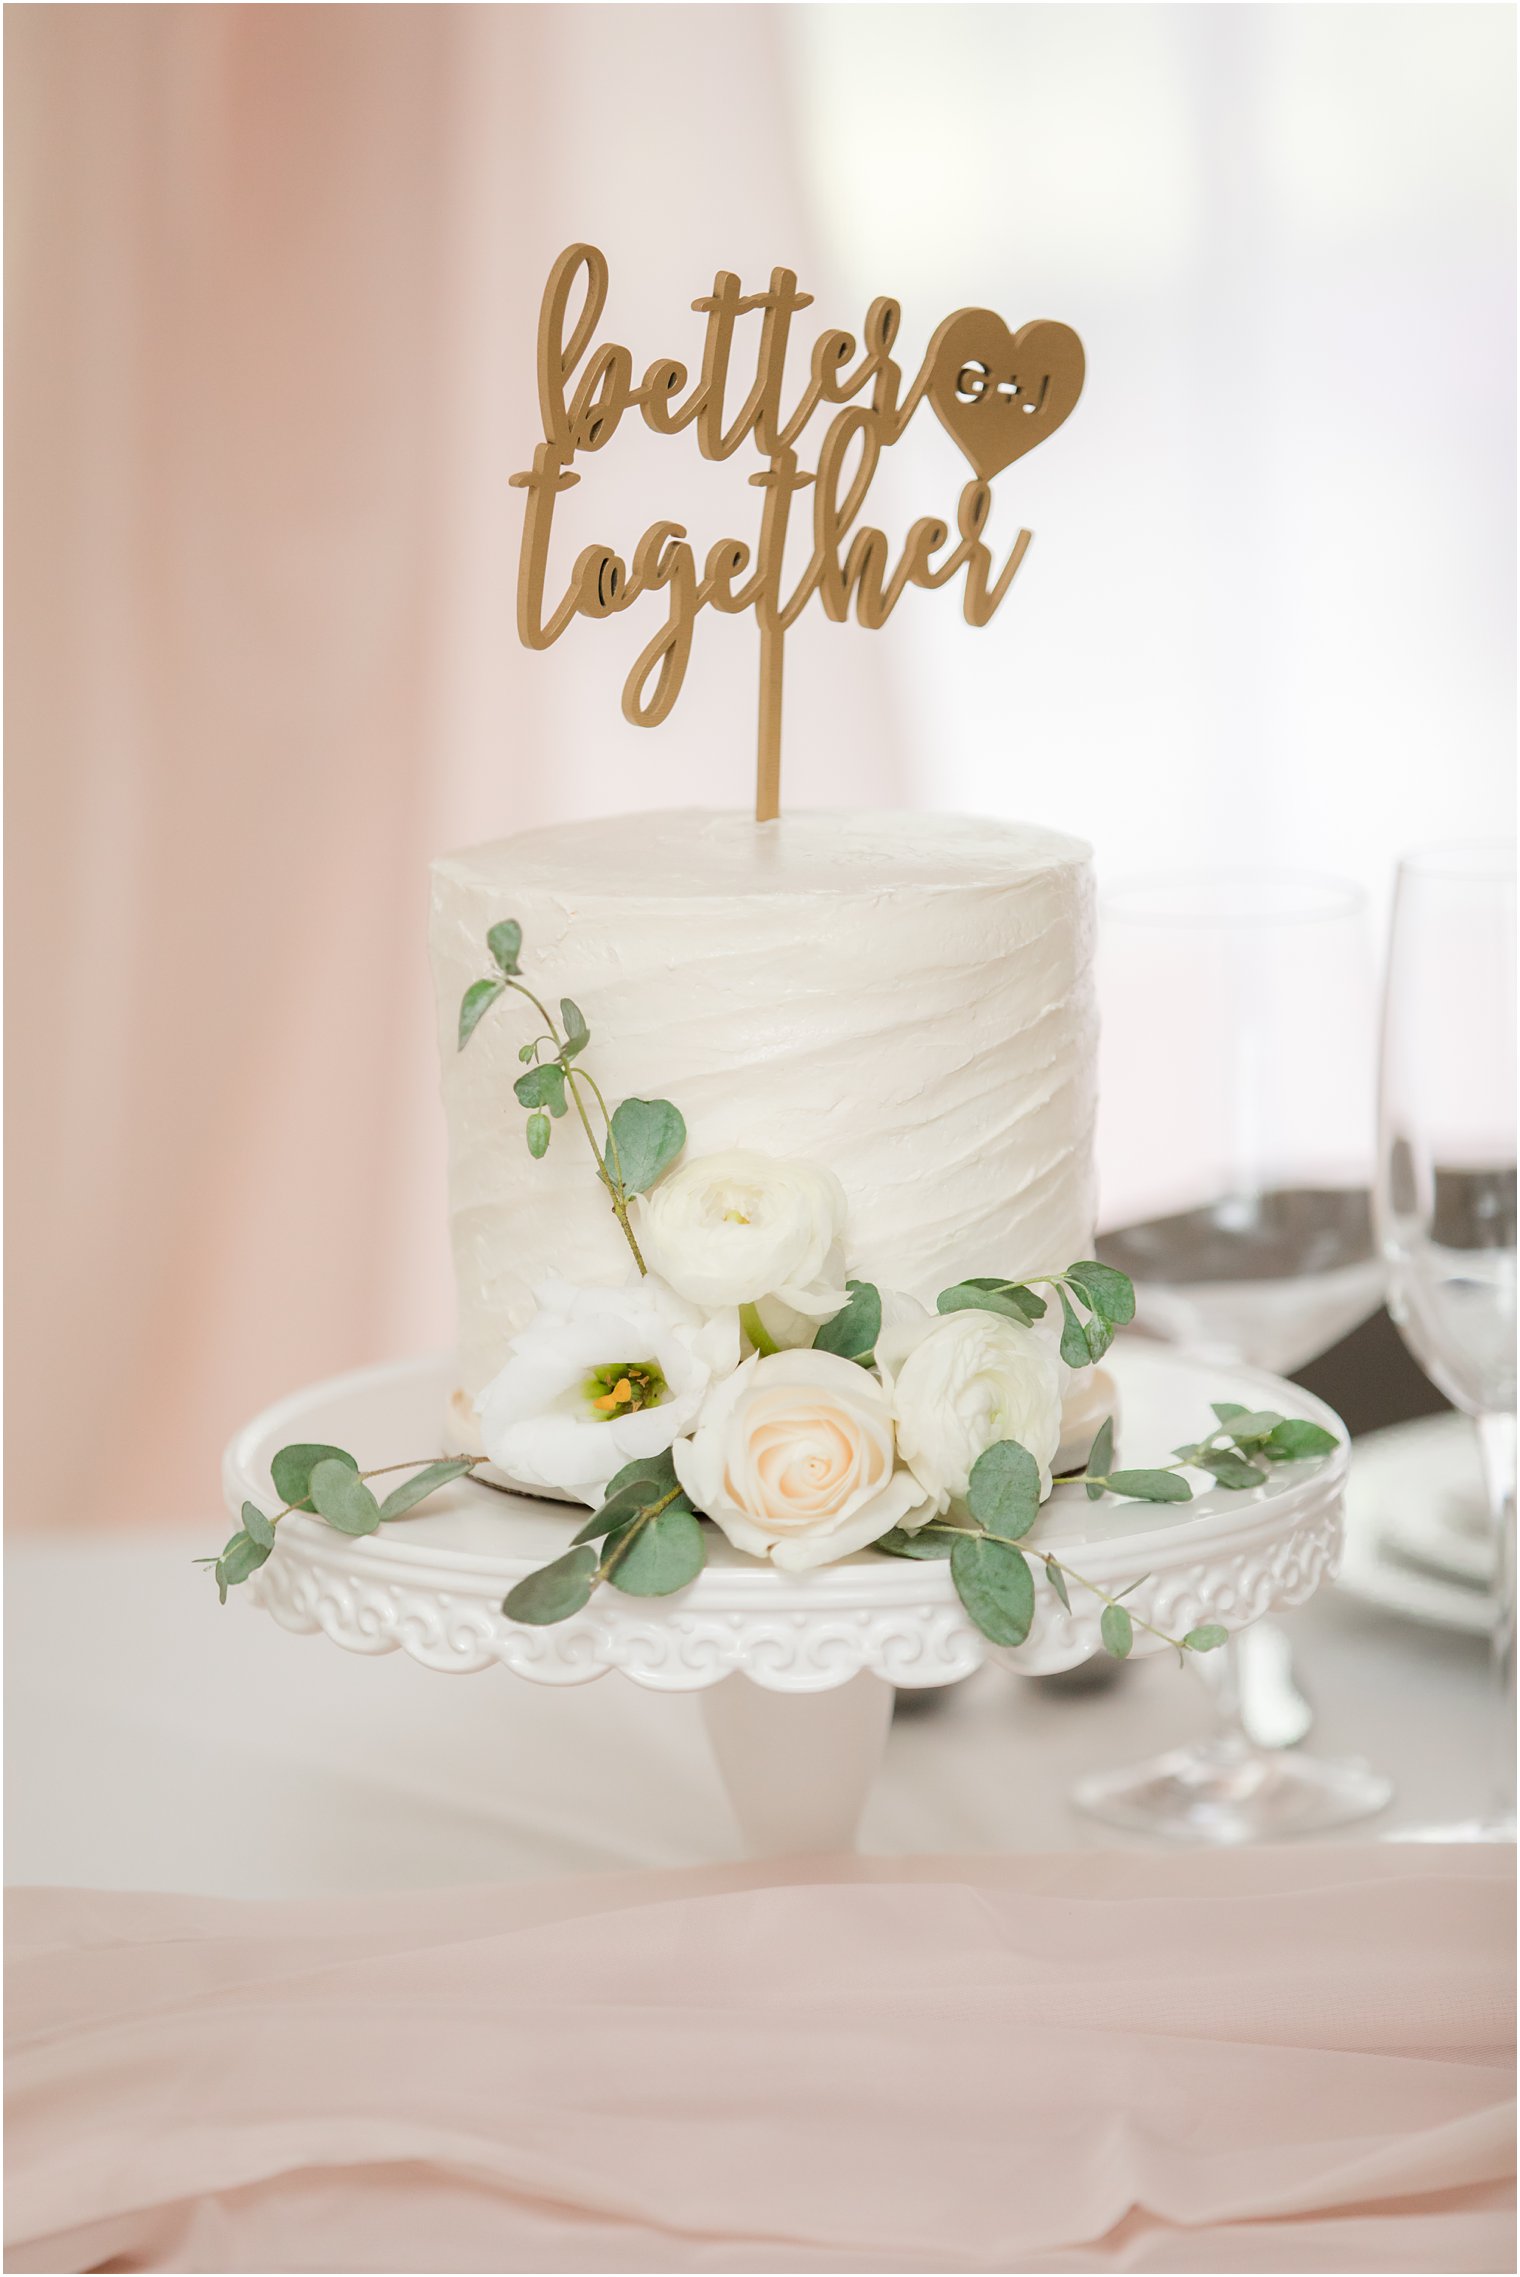 Wedding cake with Better Together cake topper